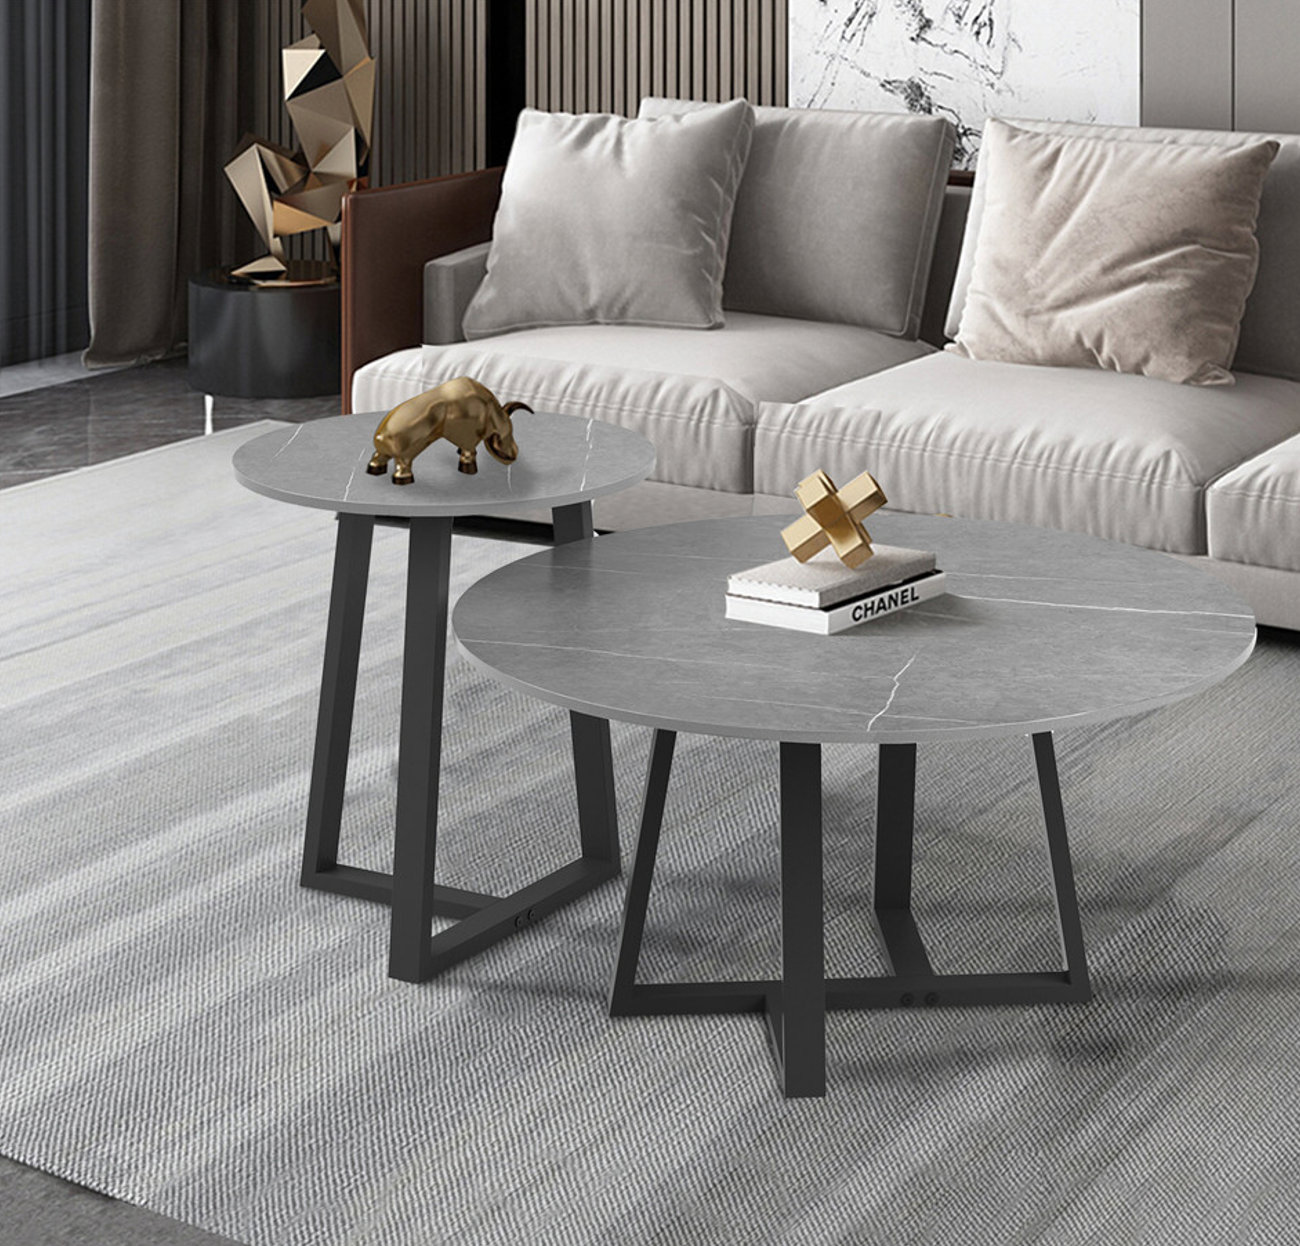 BROADWAY TWO TIER COFFEE TABLE SET - GREY STONE